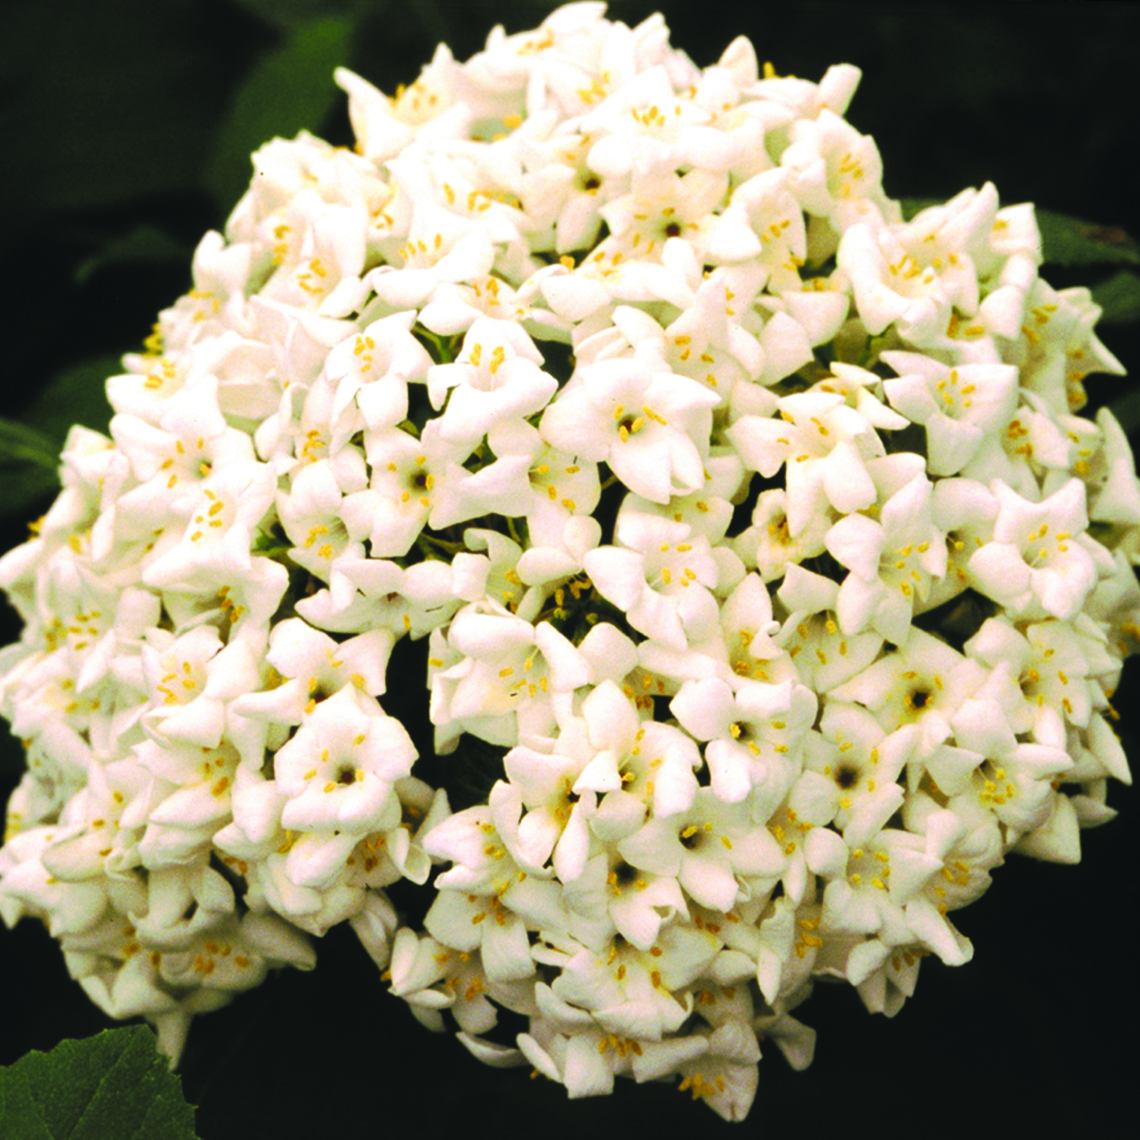 Closeup of the white inflorescence of Viburnum carlecephalum made up of several small white florets with prominent yellow anthers